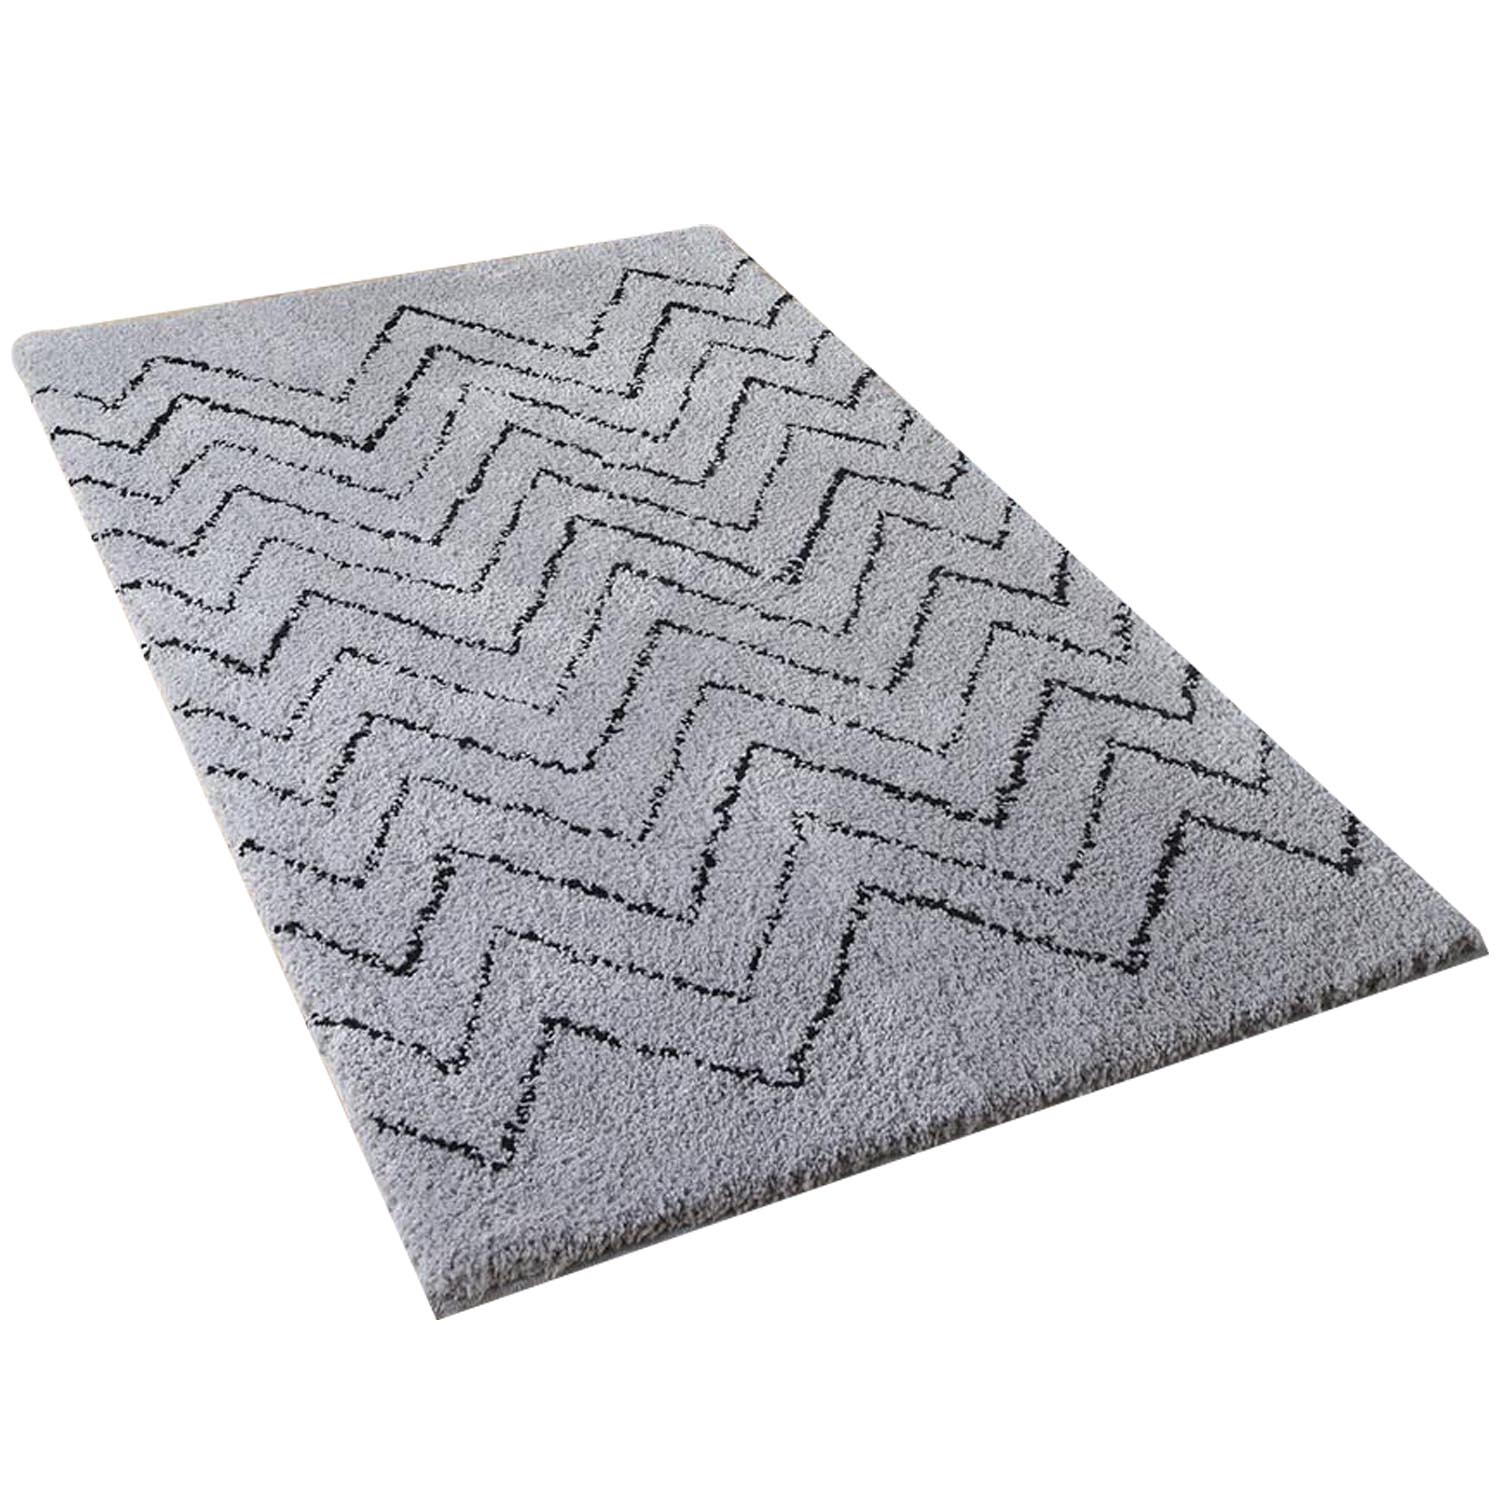 Alta Silver and Black Rug 110 x 66cm Image 1